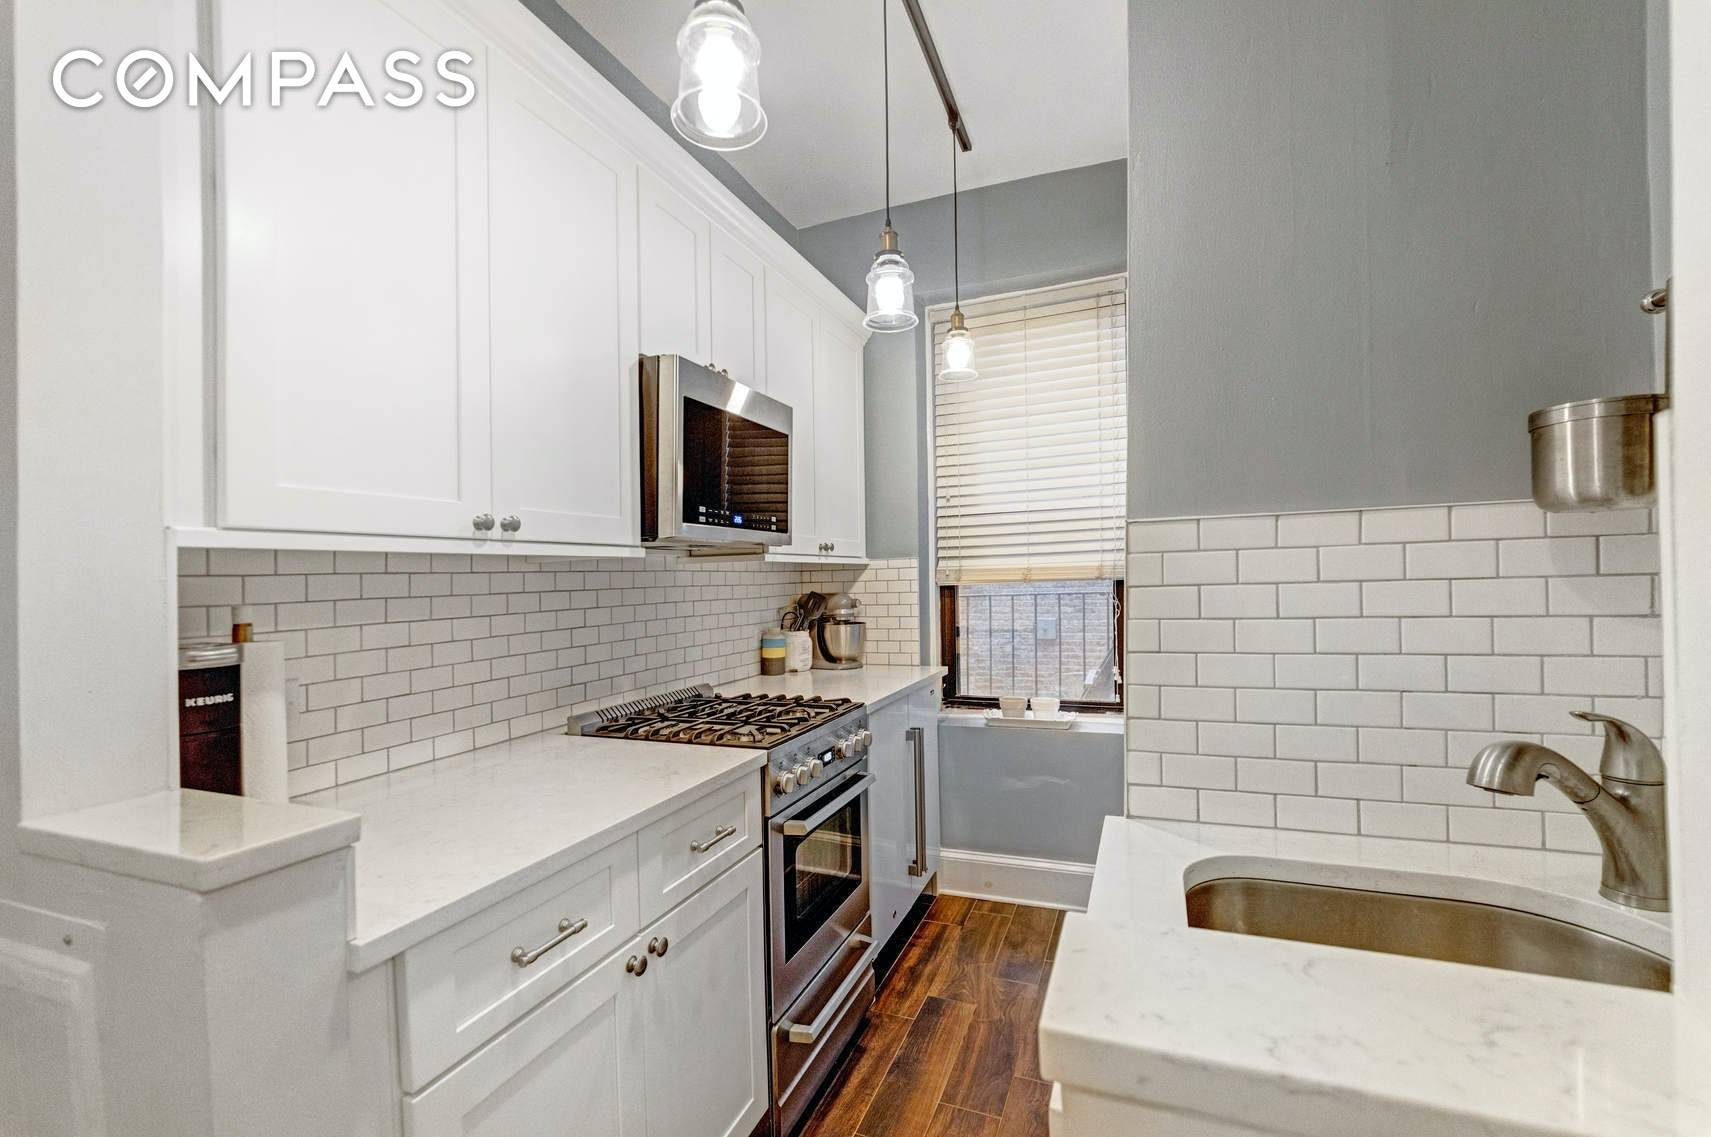 Located on one of the most desirable Brooklyn Heights blocks, this recently redesigned studio is the ideal home for those that seek quality and convenience.